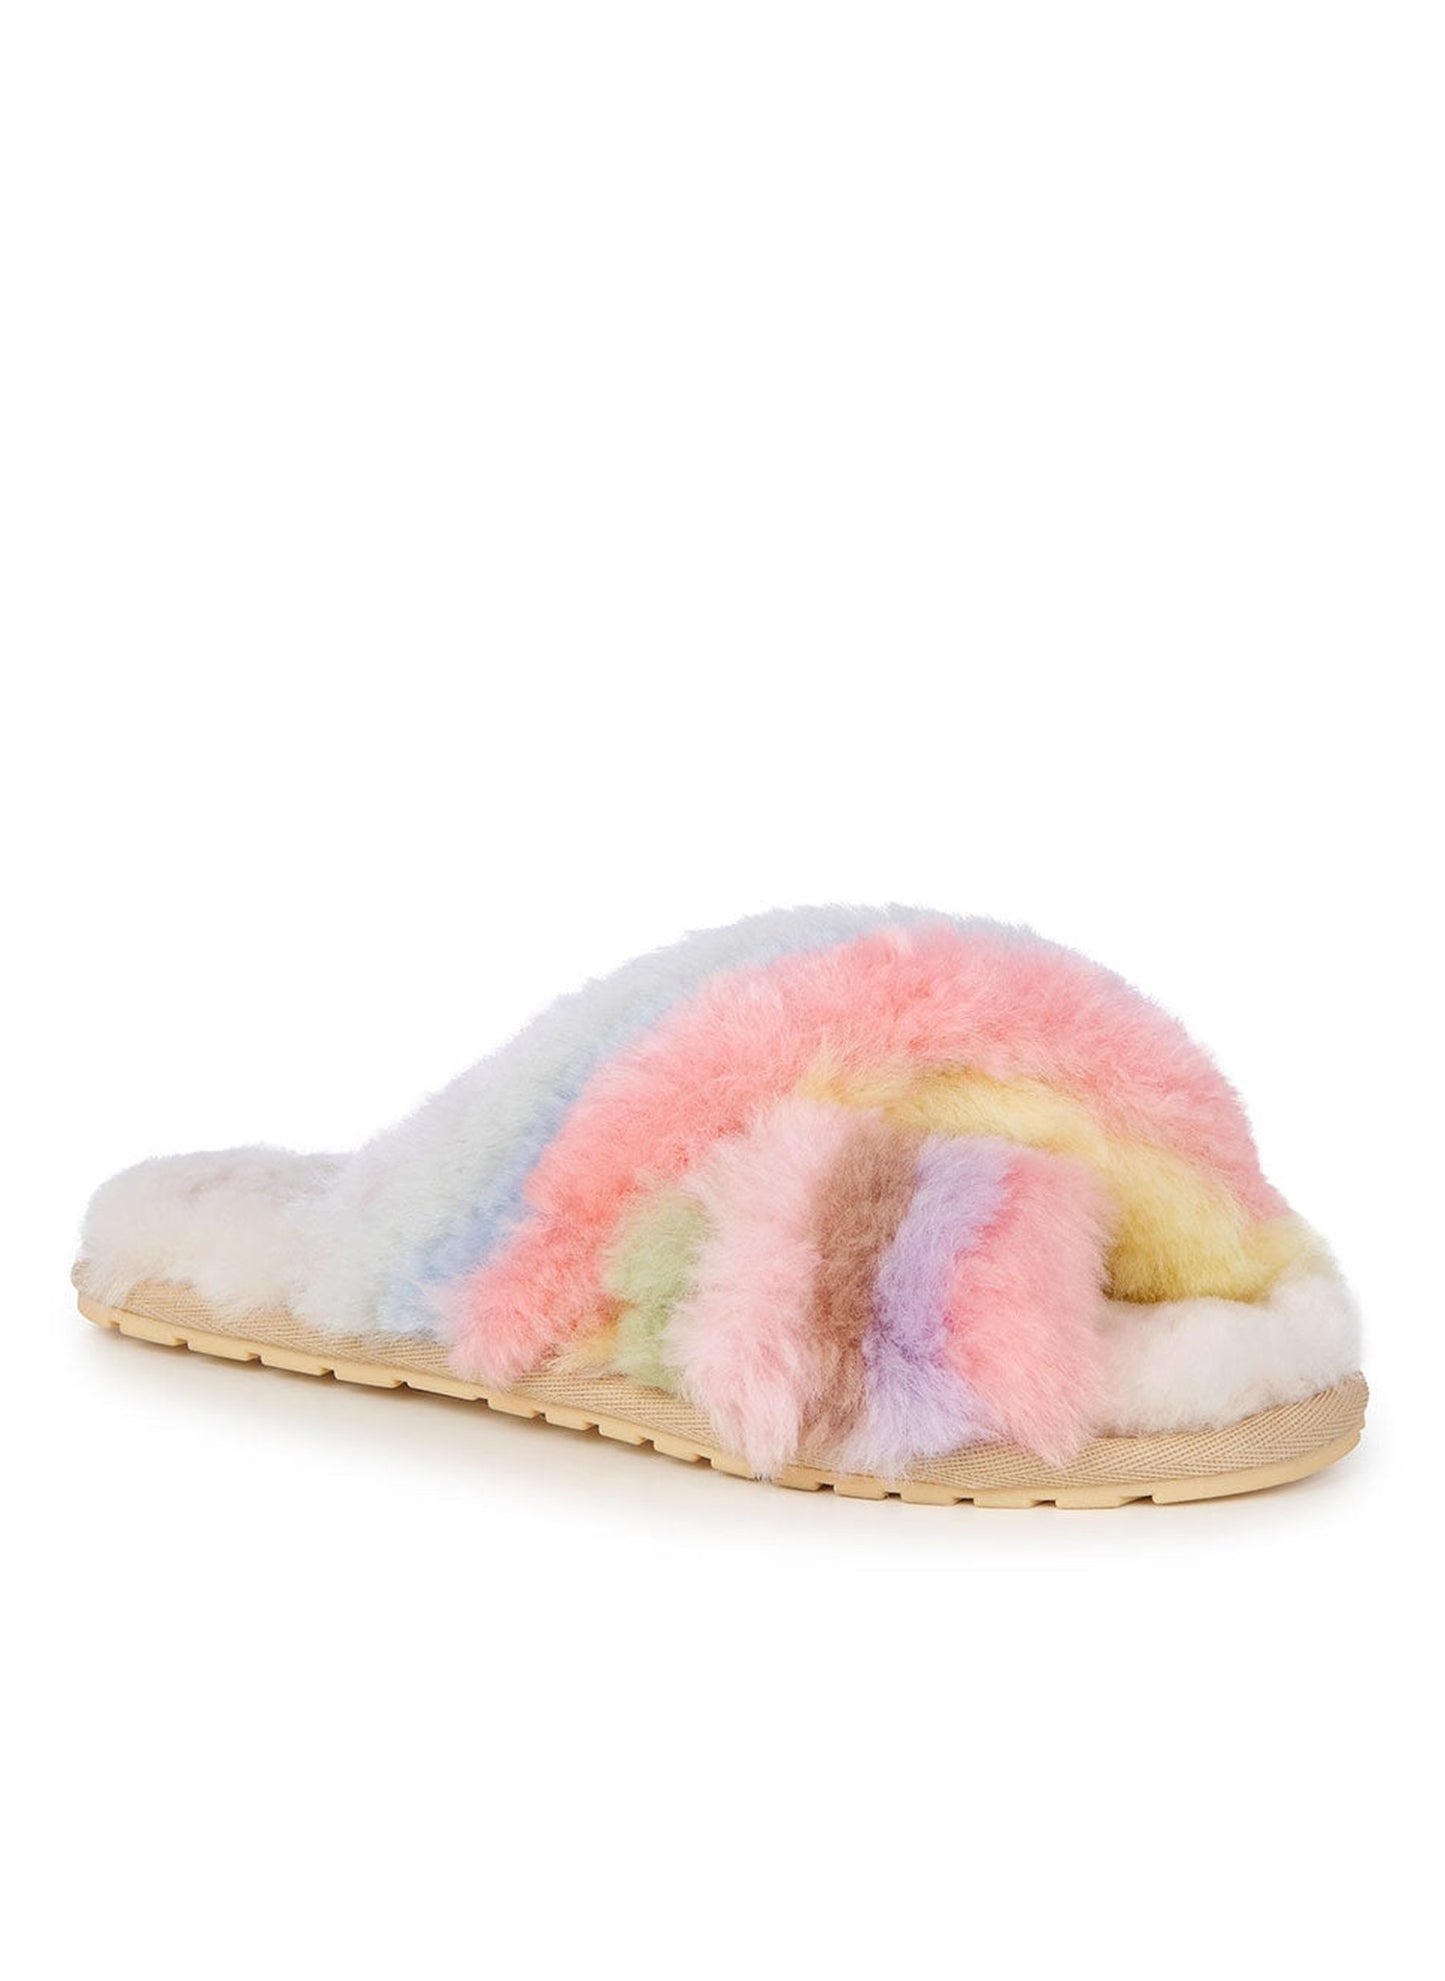 Mayberry Slippers - Rainbow Pastel